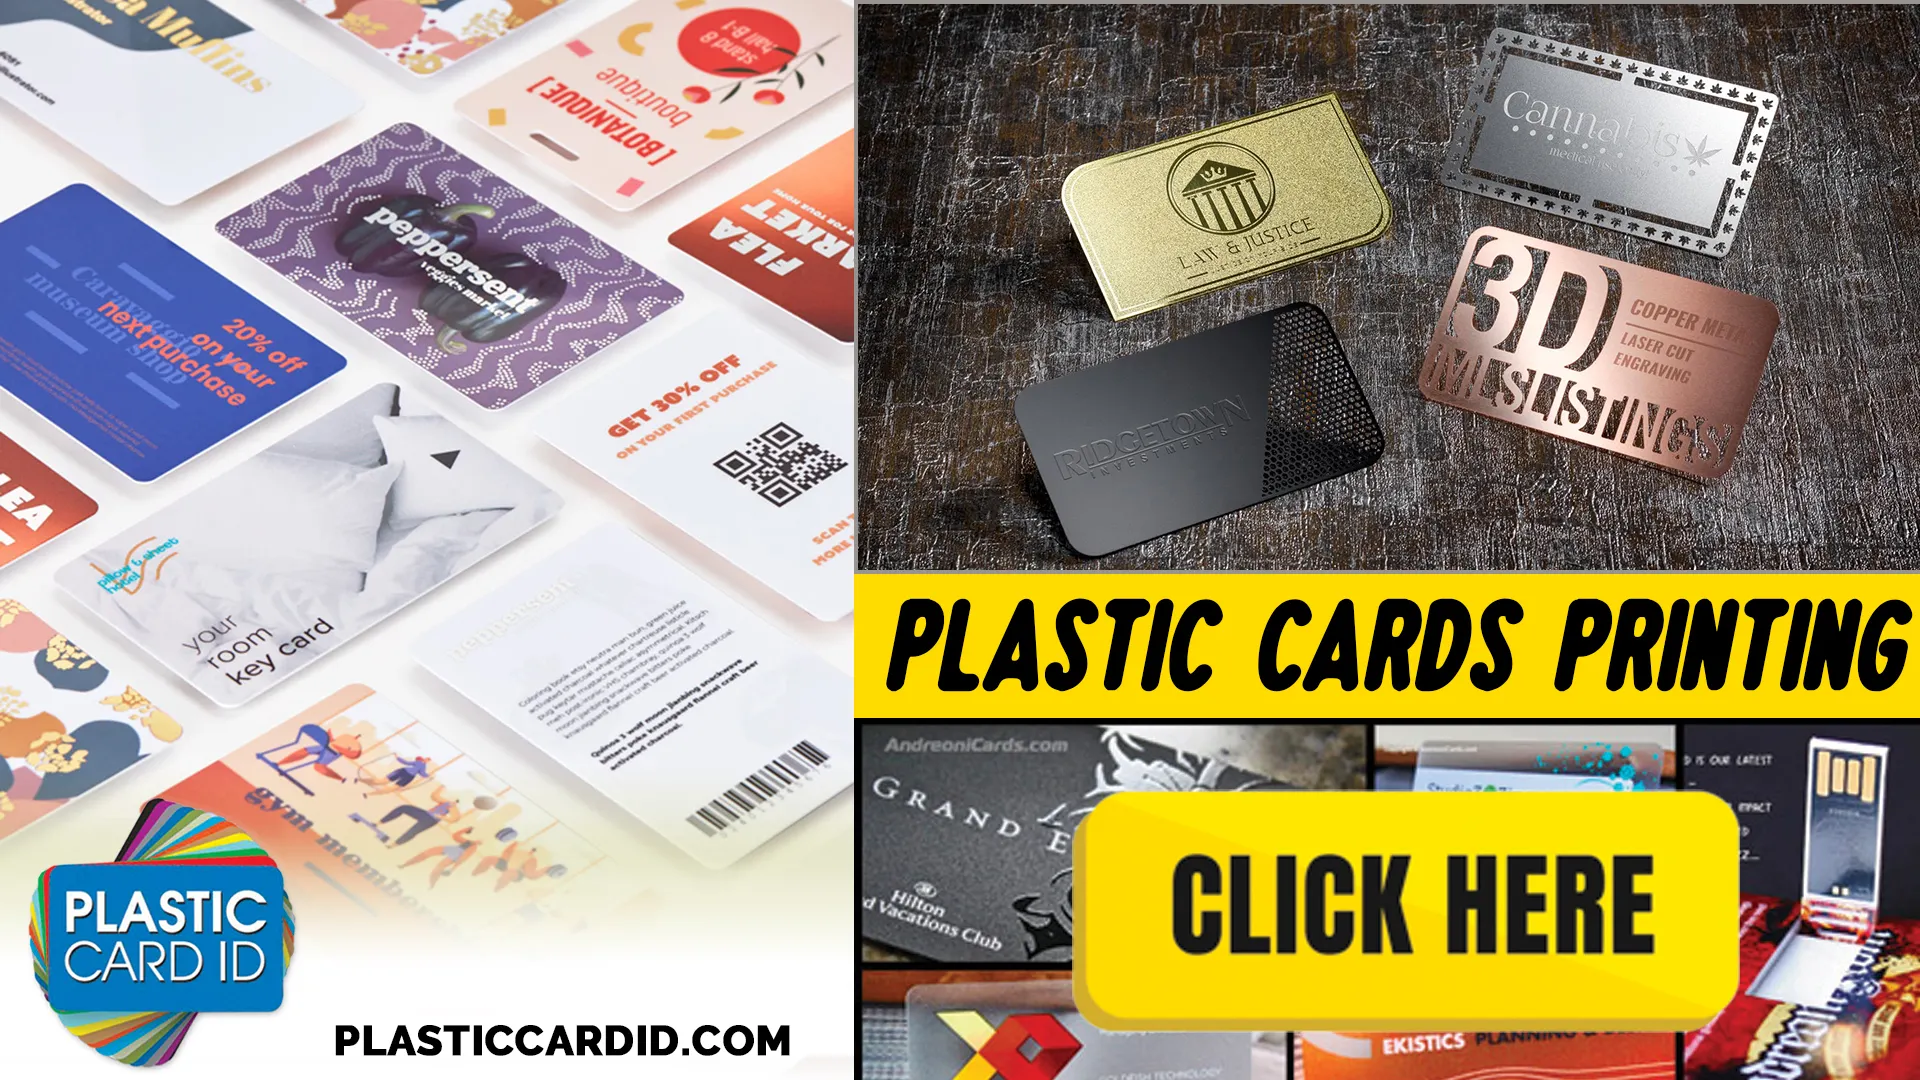 Keep Your Plastic Cards in Peak Condition with Plastic Card ID




